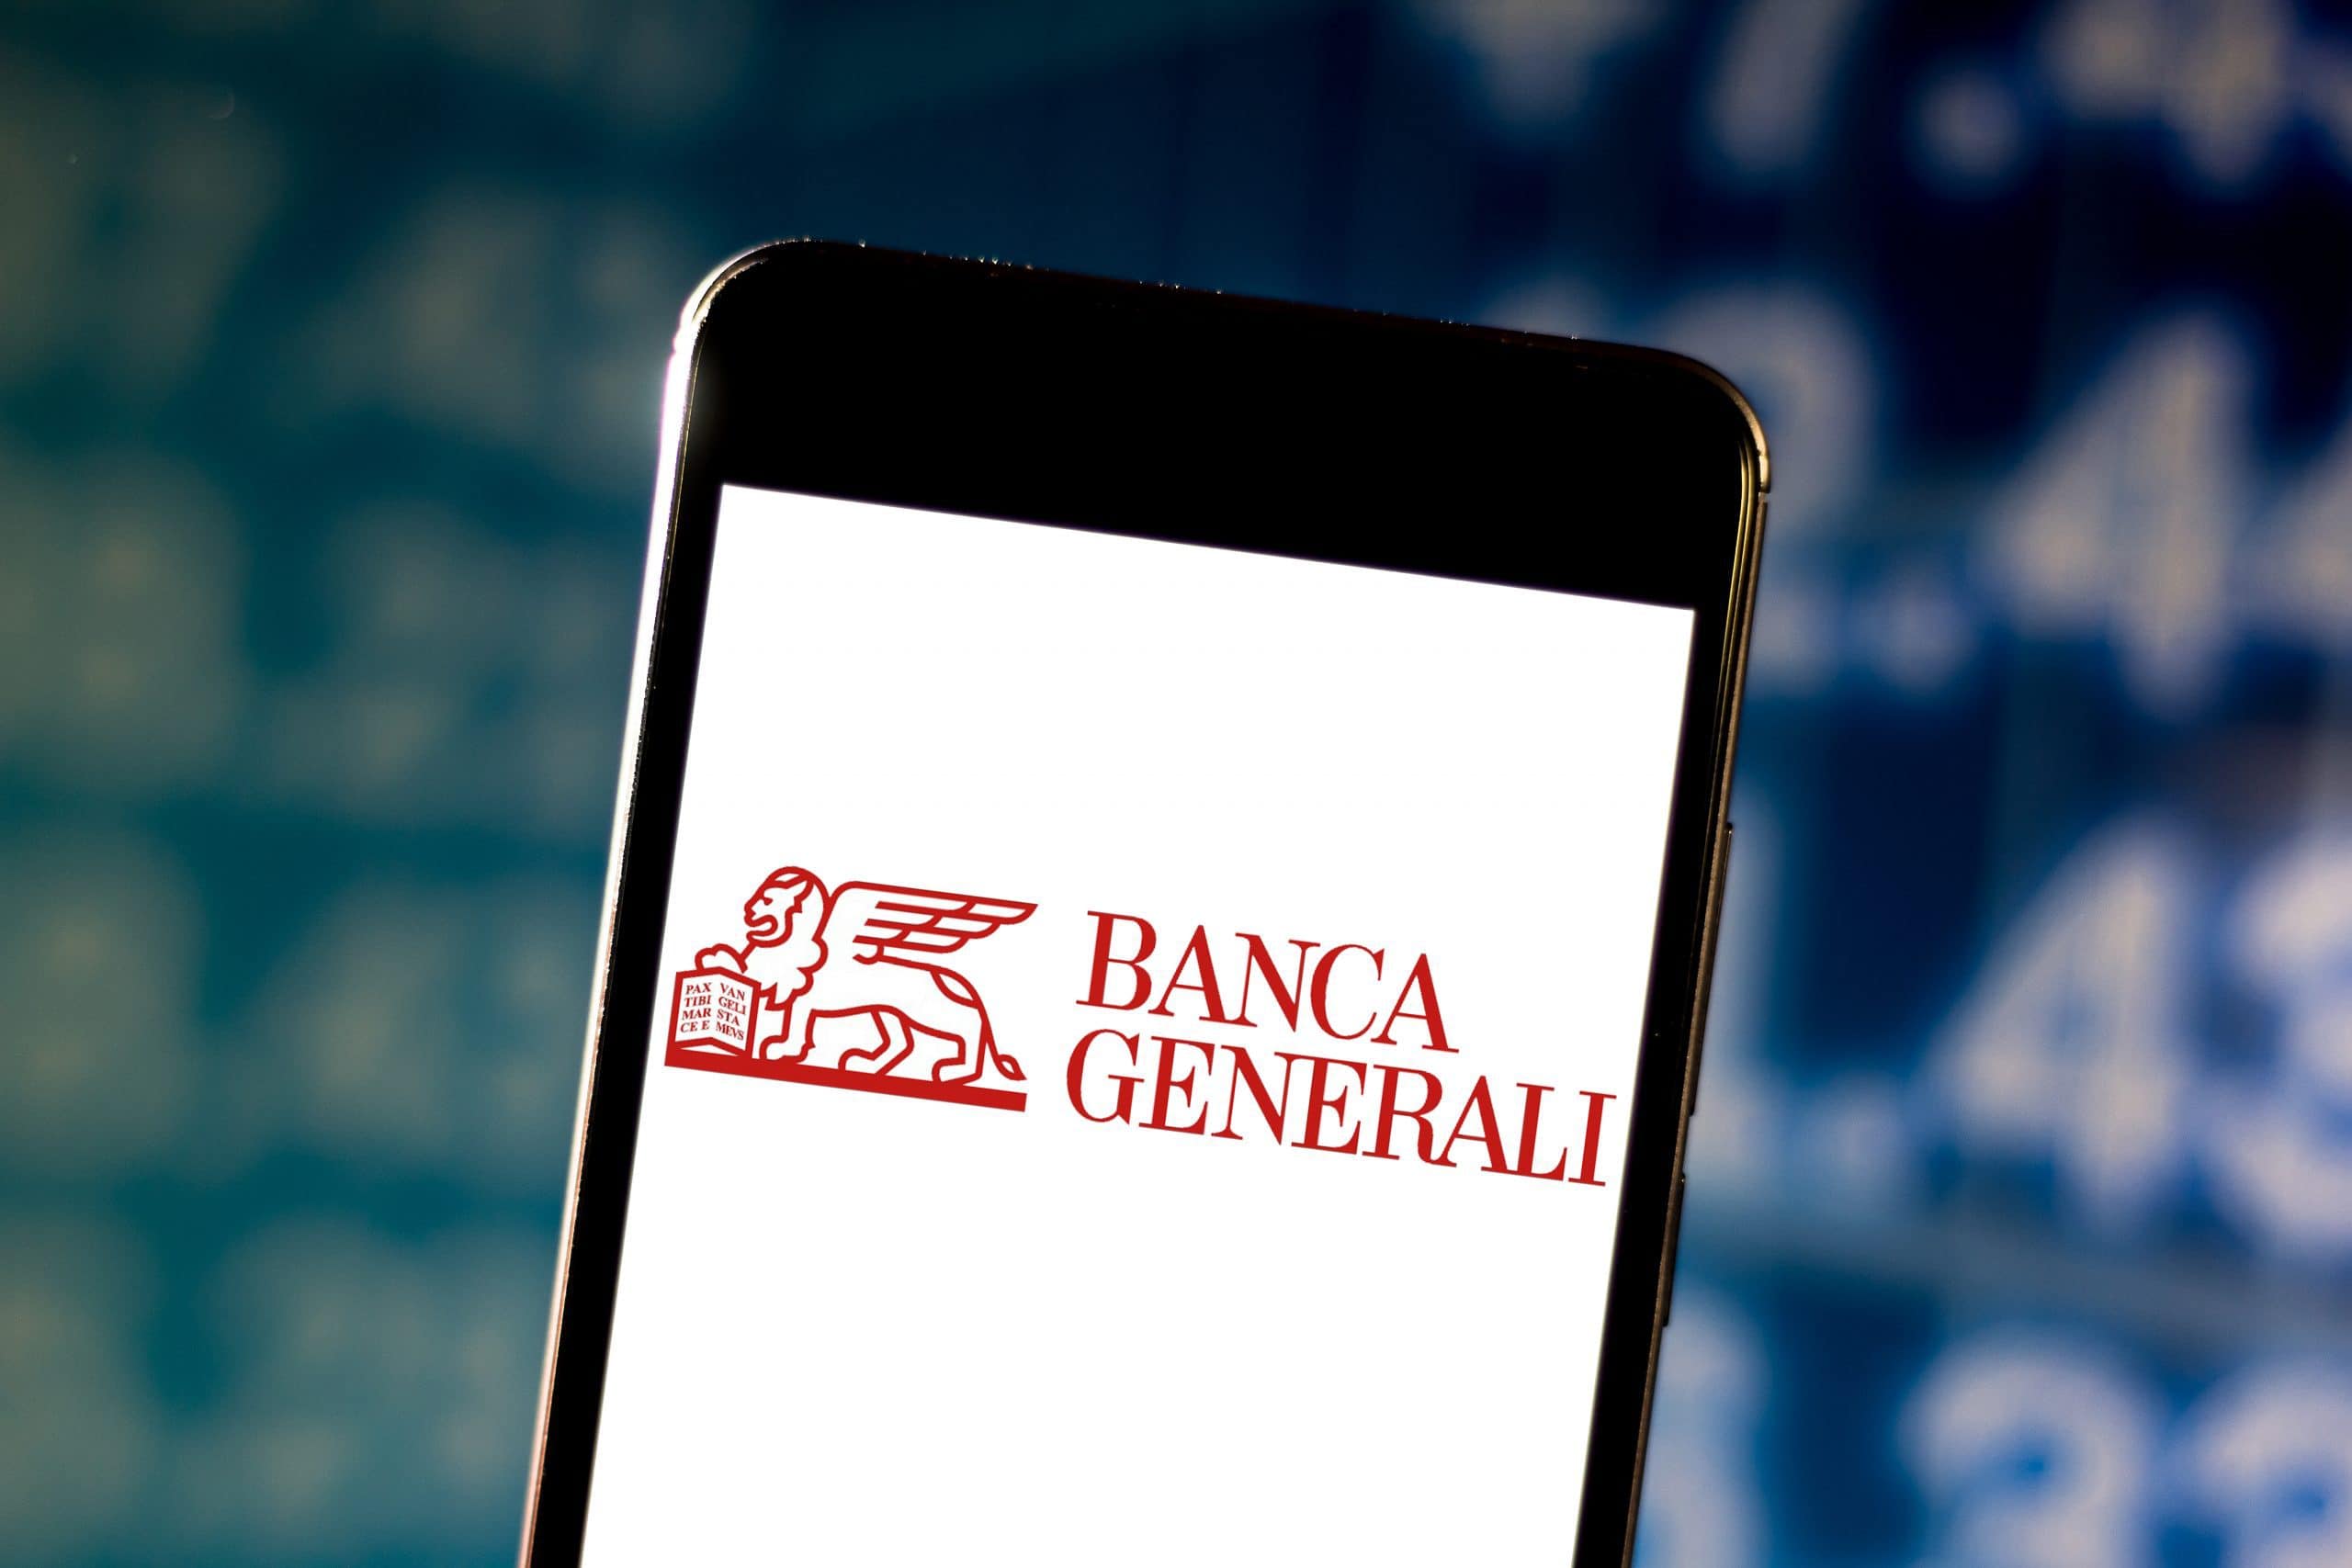 Banca Generali offers its customers direct BTC purchases